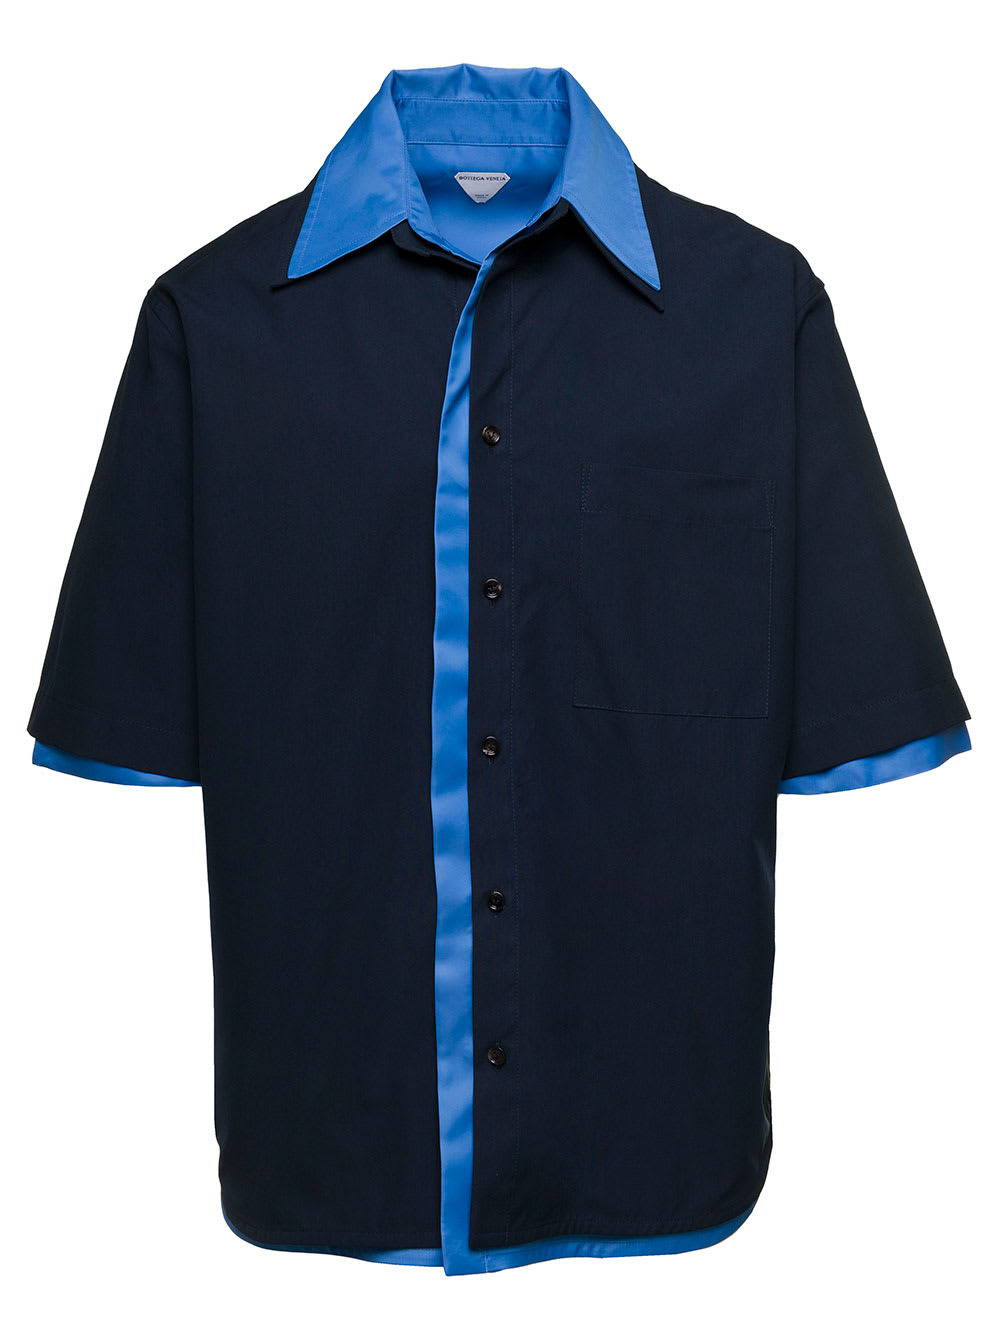 Double Layer Shirt With Short Sleeves